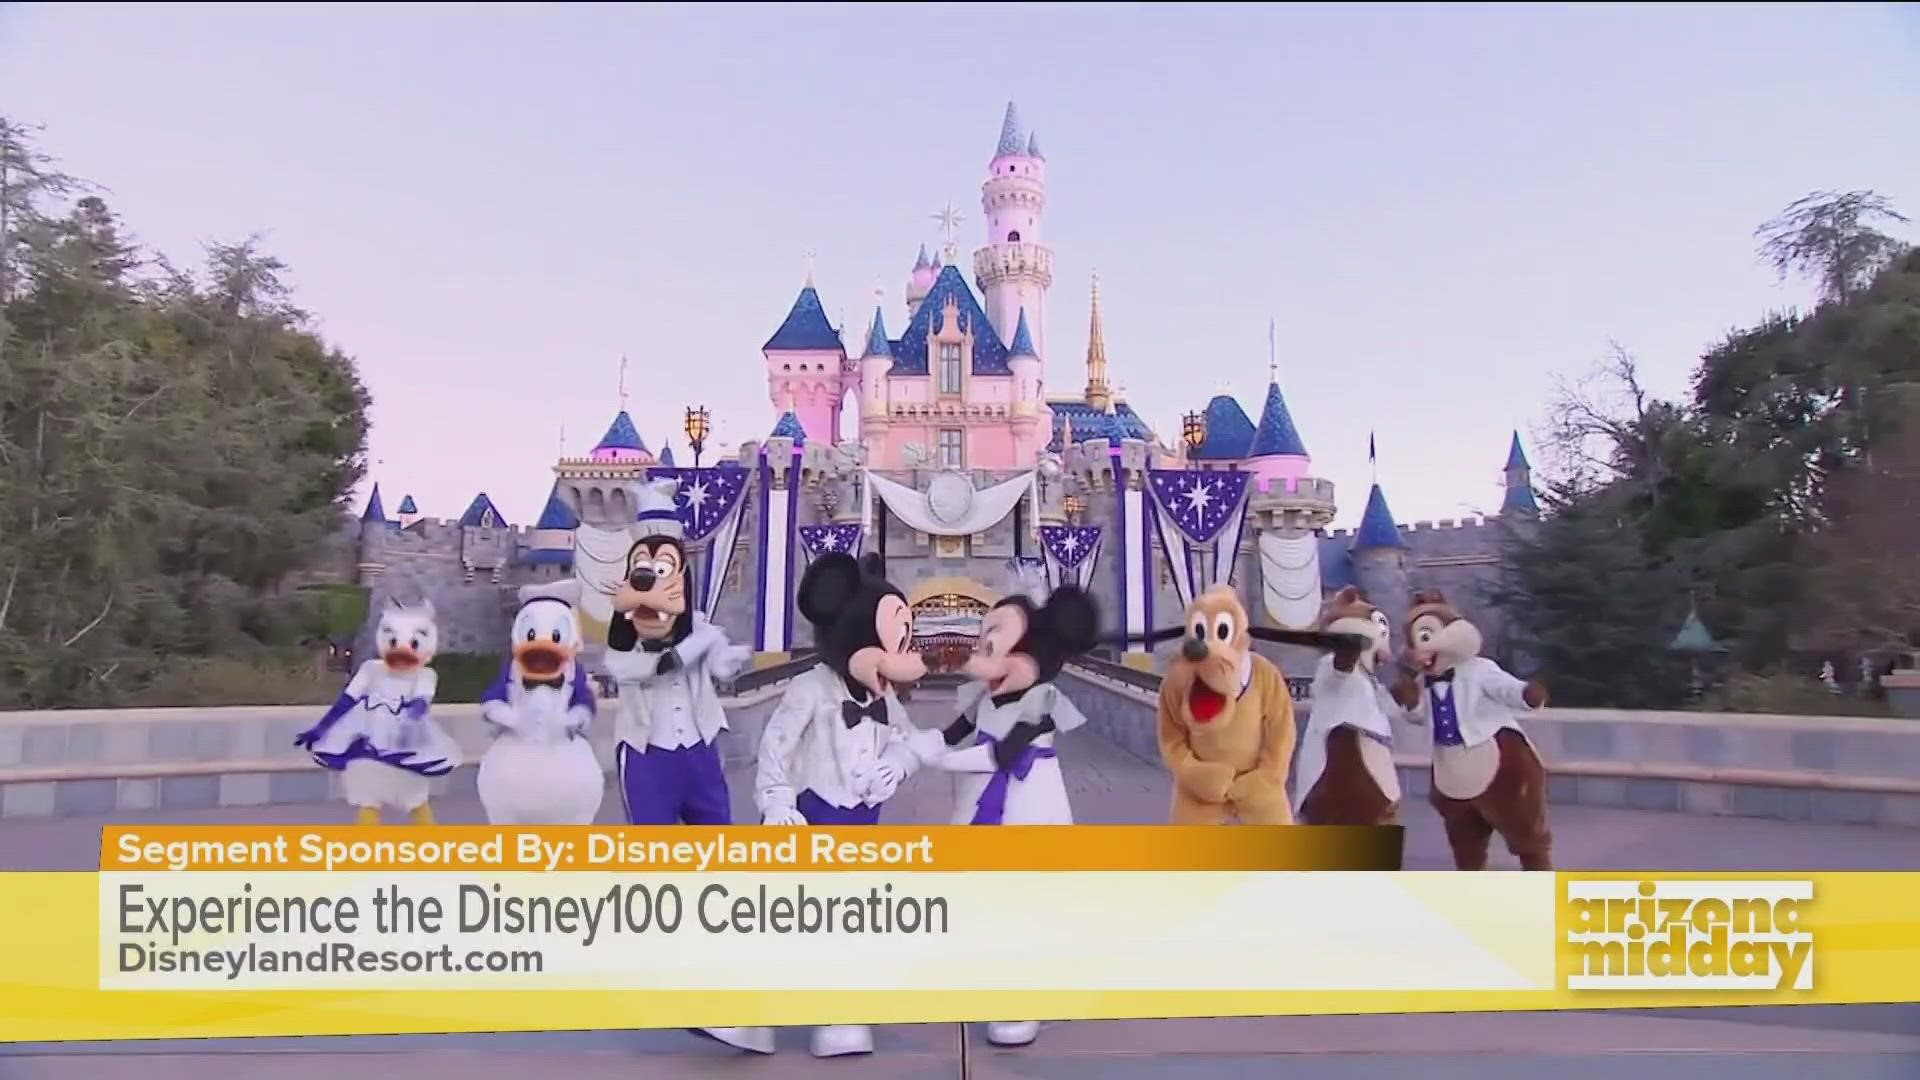 Claudia Duron Burke & Donald Duck give us a look at the dazzling delights, festive decor and nighttime shows celebrating 100 wonderous years at the Disneyland Resort